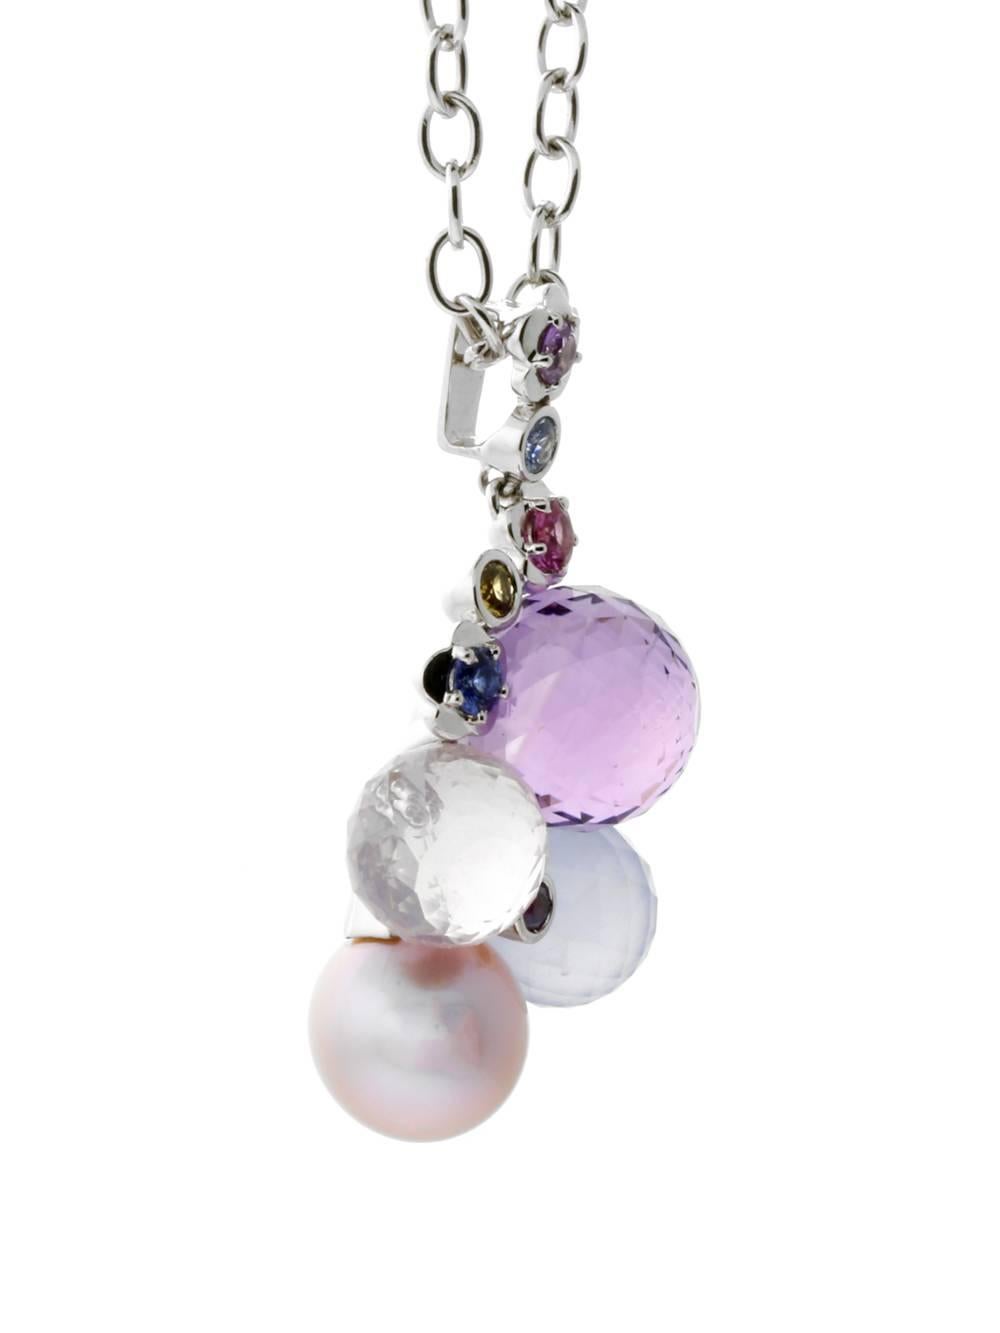 With a mixed eclectic blend of feminine baubles, this versatile Chanel necklace contains various gemstone accents and is ideal for the woman who loves to wear shades of pink and violet. 

Dimensions: .74″ wide by 1.49